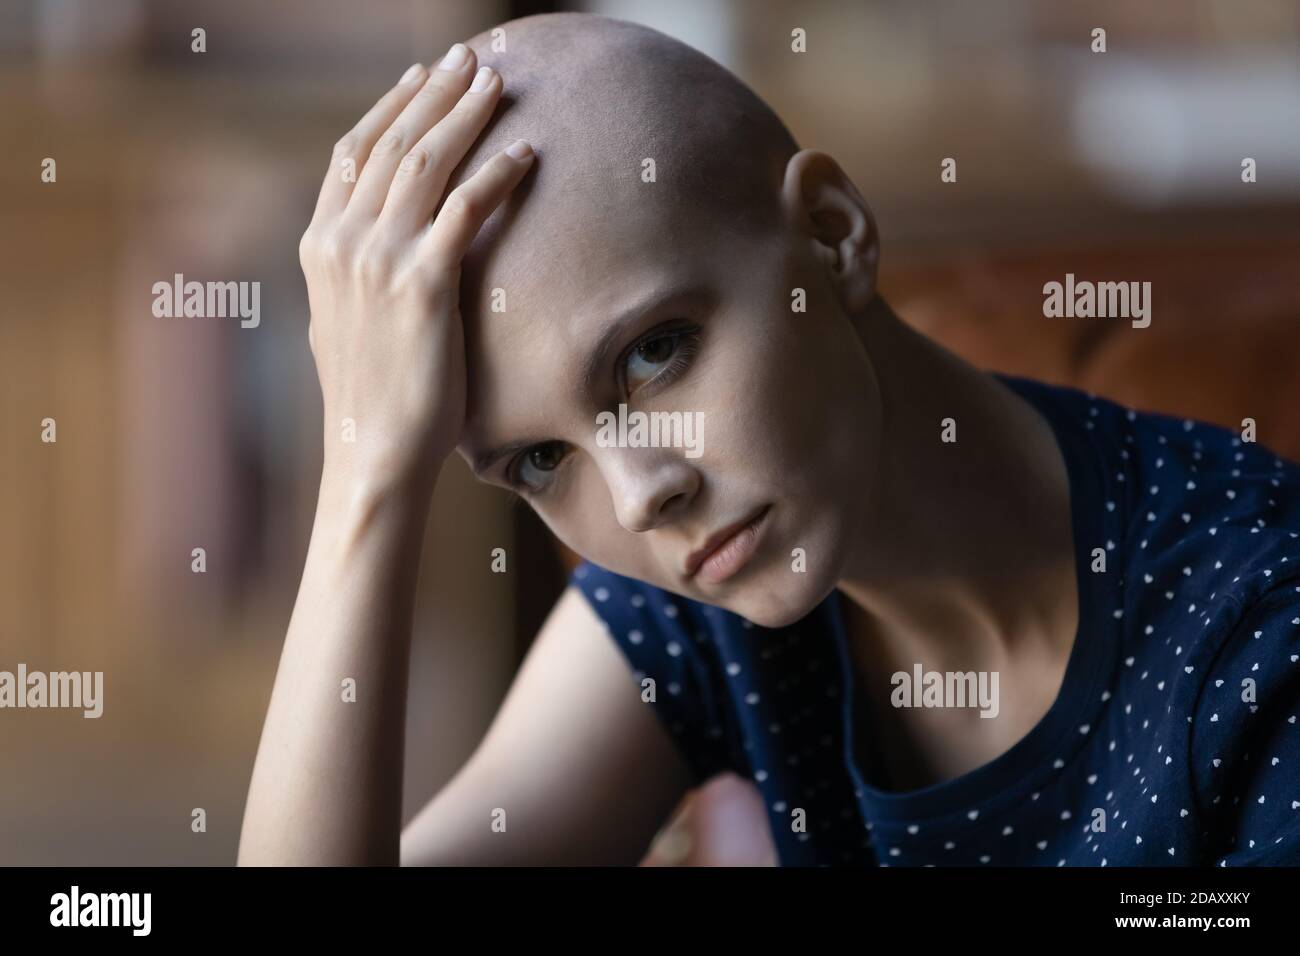 Upset millennial woman having cancer diagnosis touching hairless head Stock Photo